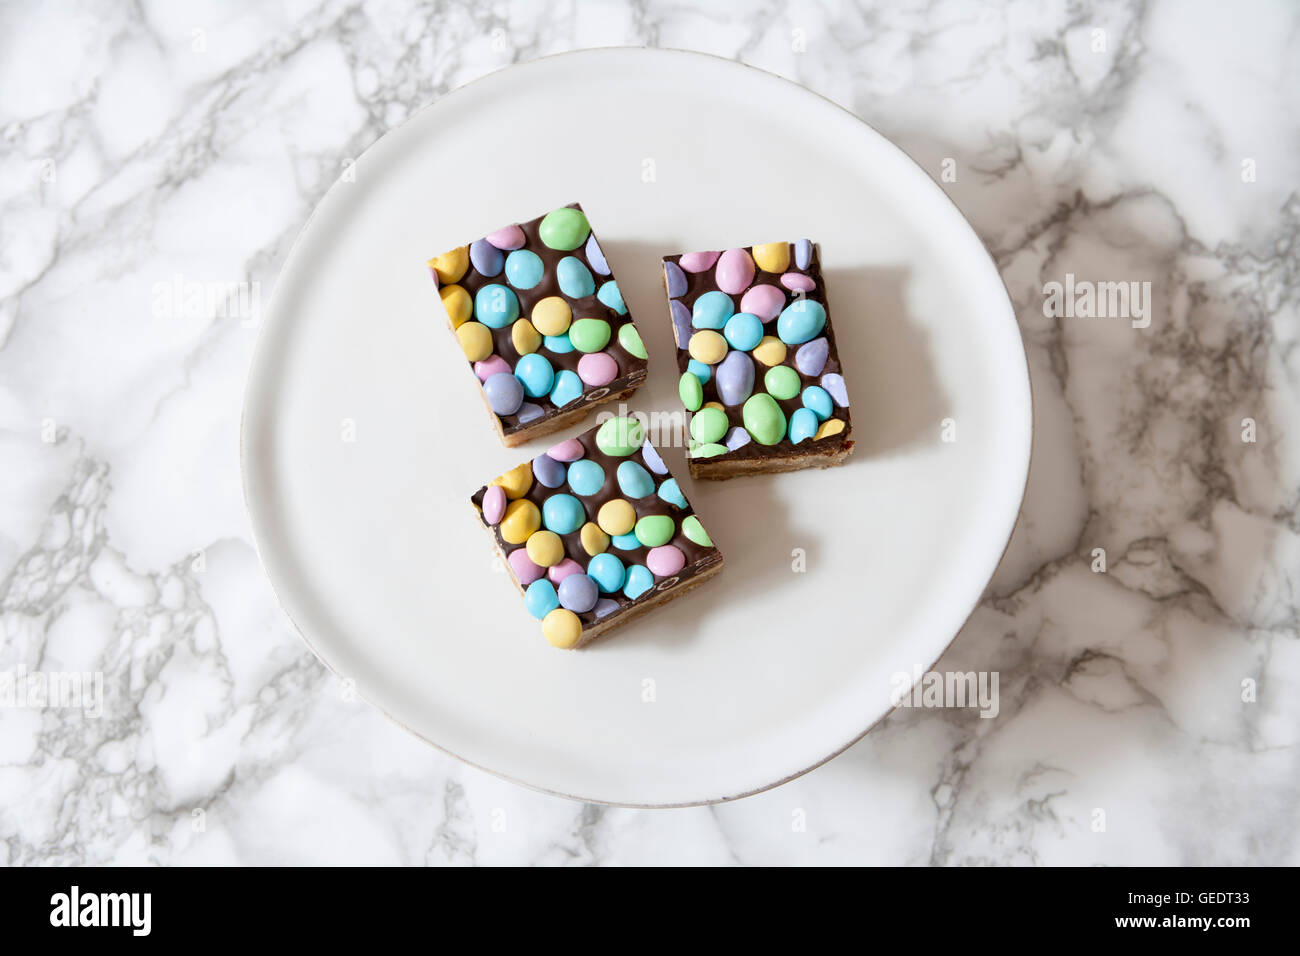 Shortbread Candy Bars with Pastel Candies, High Angle View Stock Photo